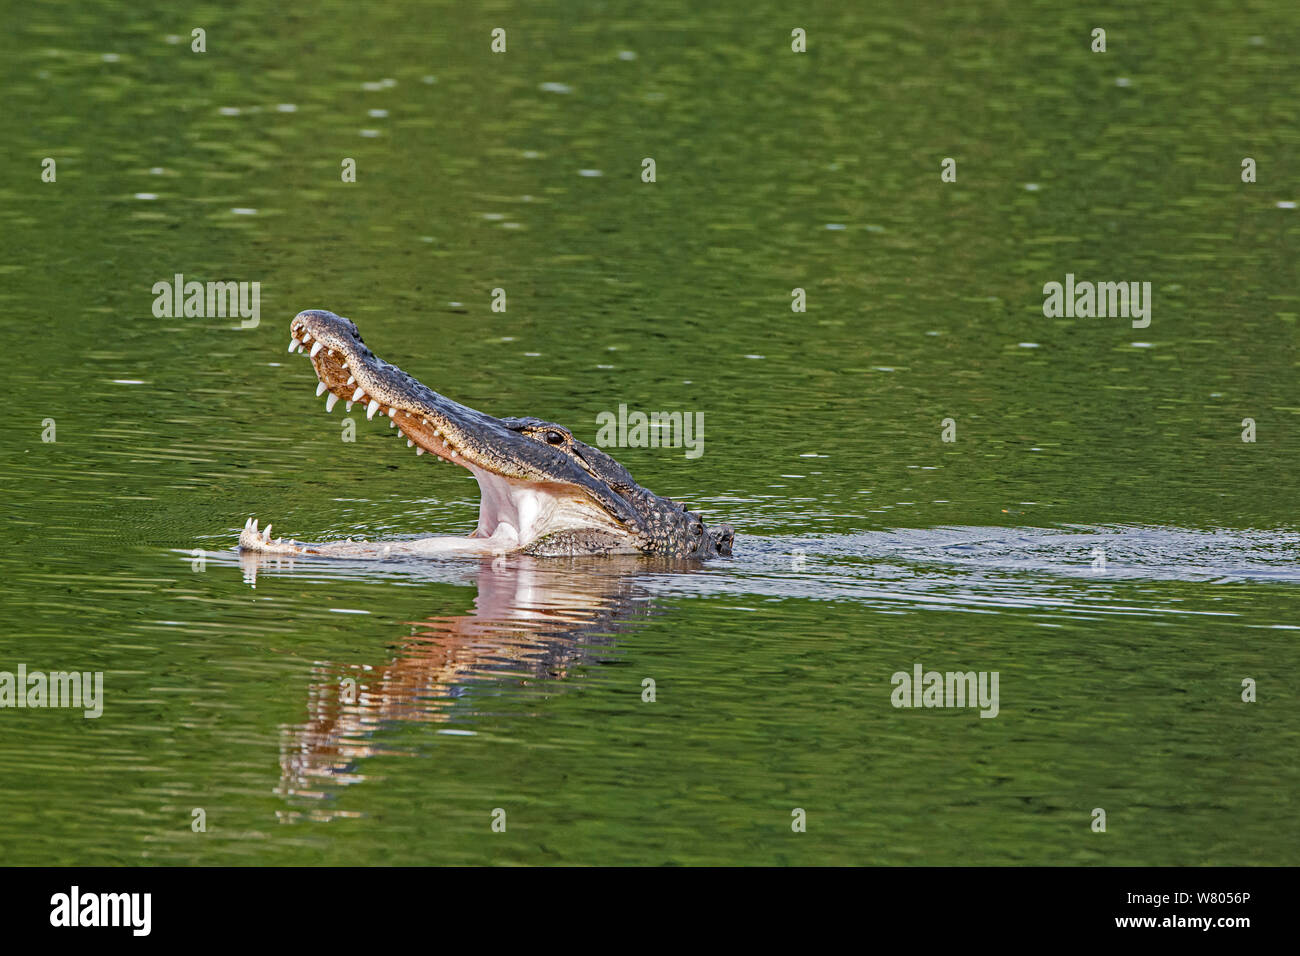 American alligator (Alligator mississippiensis) swimming with mouth open to thermoregulate, Myakka River State Park, Florida, USA, March. Stock Photo